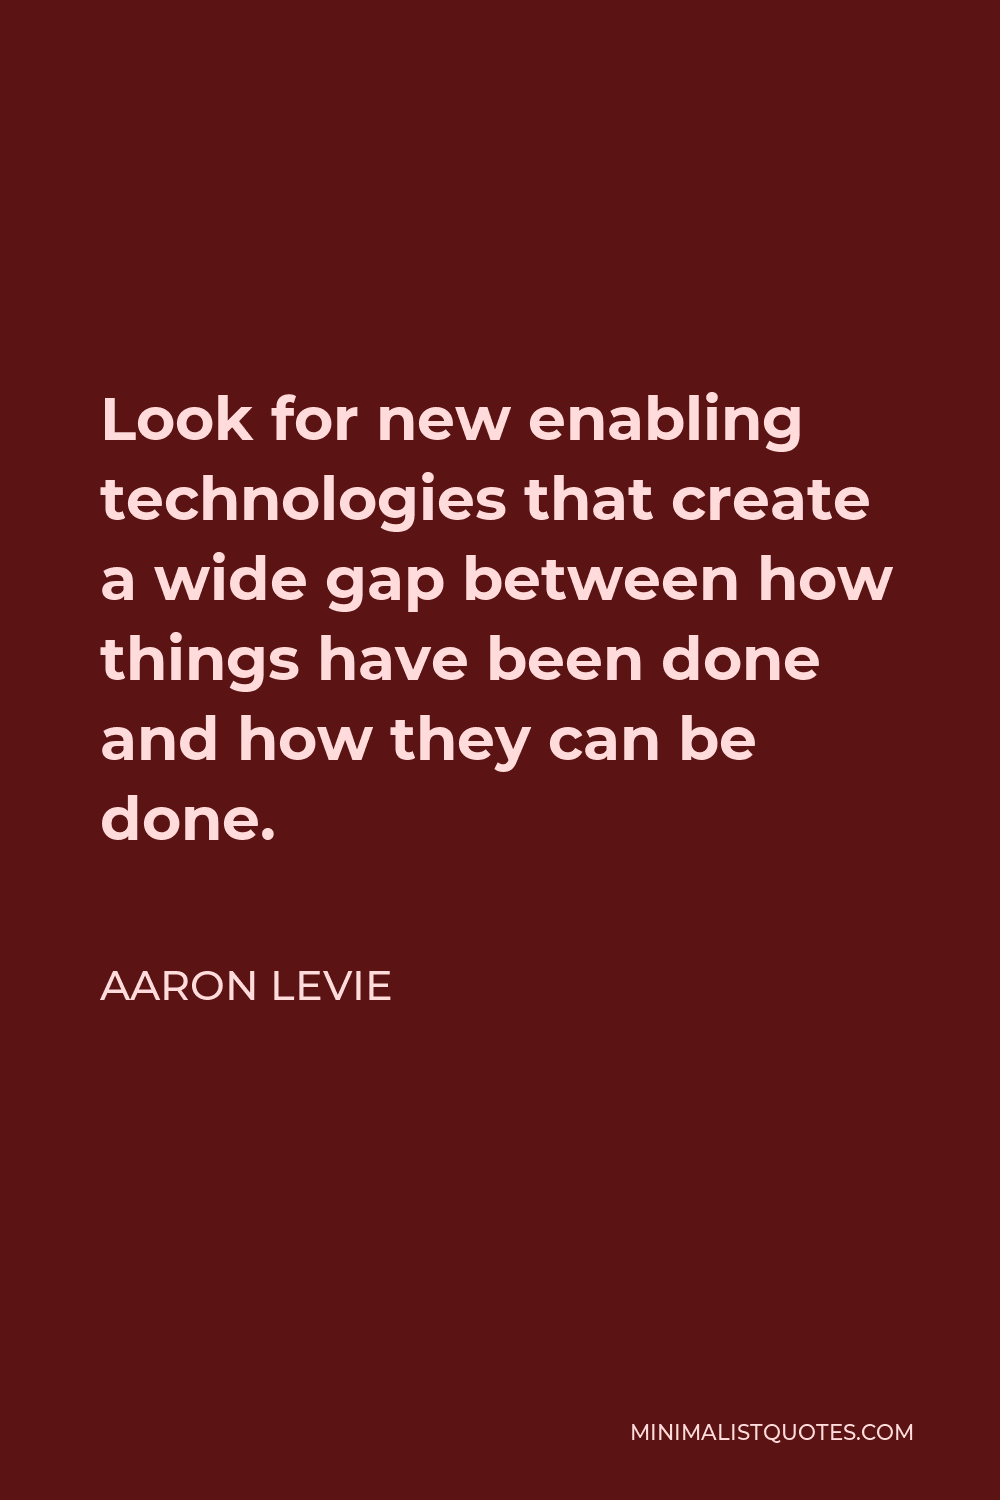 Aaron Levie Quote - Look for new enabling technologies that create a wide gap between how things have been done and how they can be done.